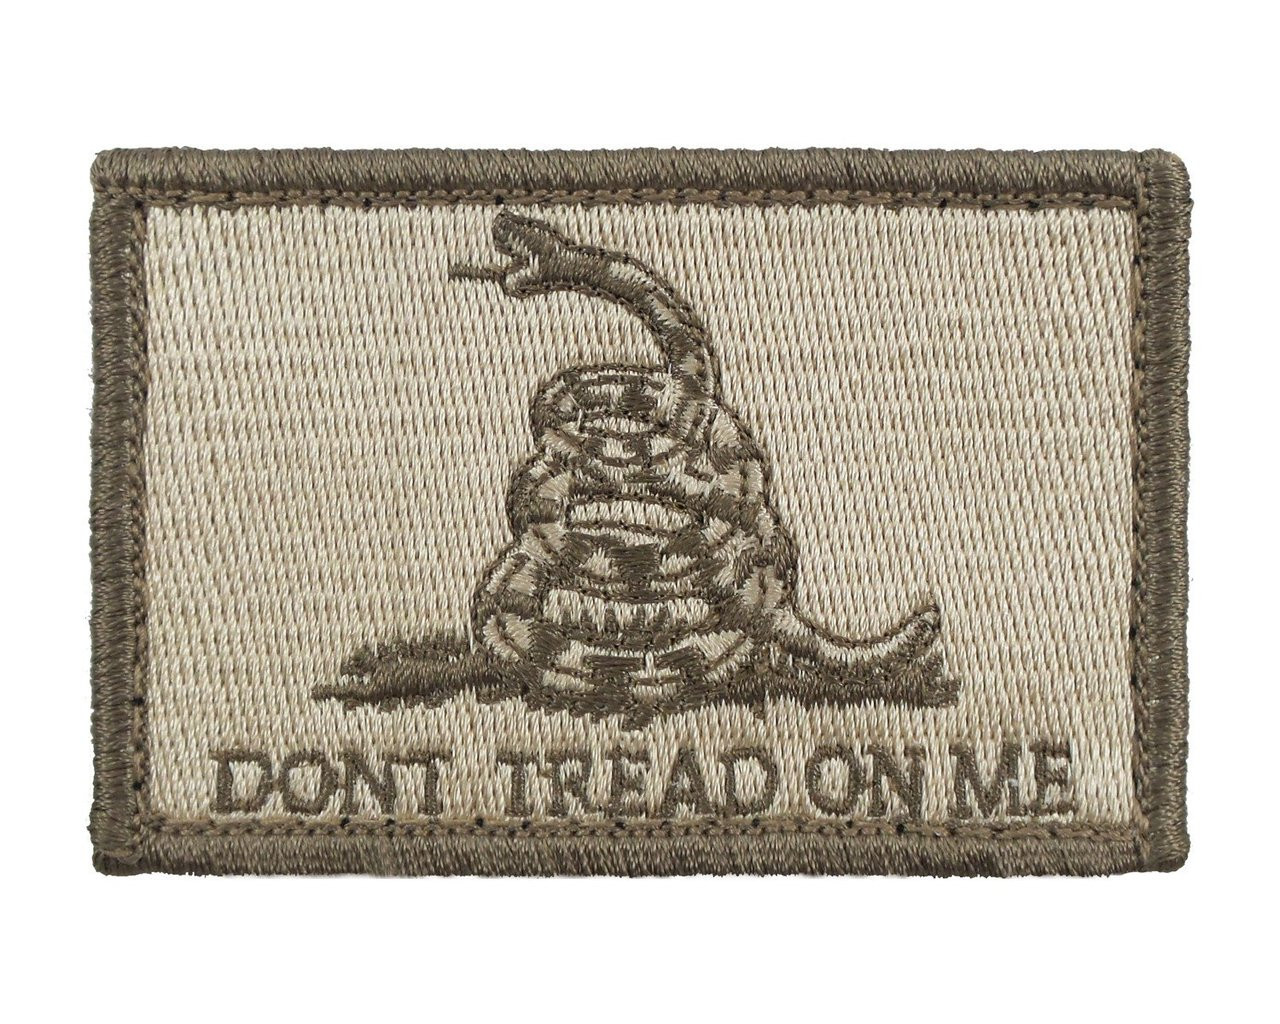  Gadsden Flag Black Embroidered Patch Don't Tread on Me w/Velcro  Brand Fastener : Clothing, Shoes & Jewelry